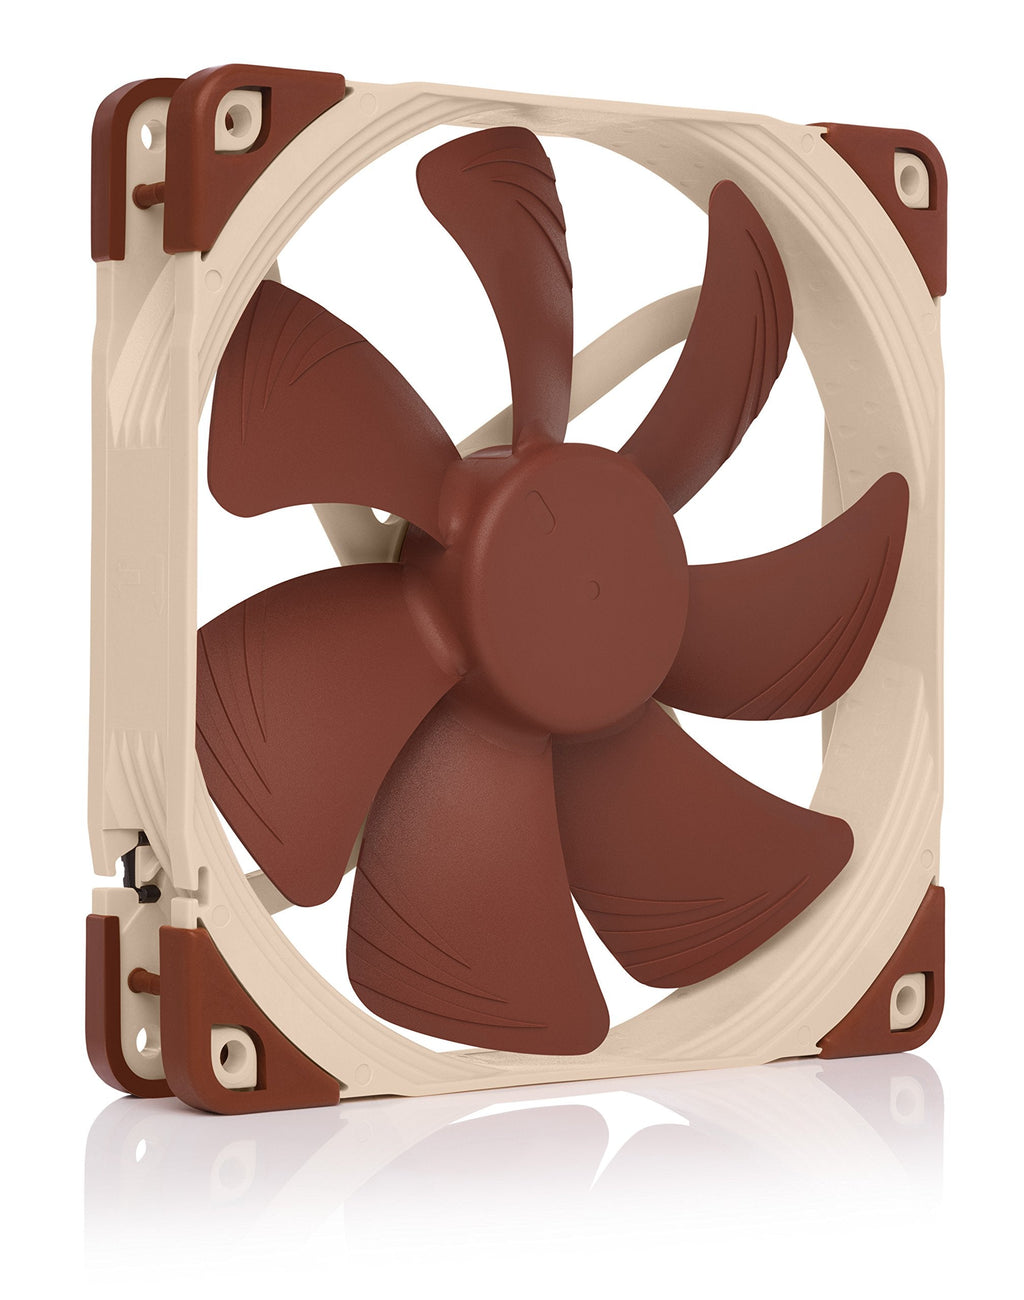  [AUSTRALIA] - Noctua NF-A14 5V PWM, Premium Quiet Fan with USB Power Adaptor Cable, 4-Pin, 5V Version (140mm, Brown)